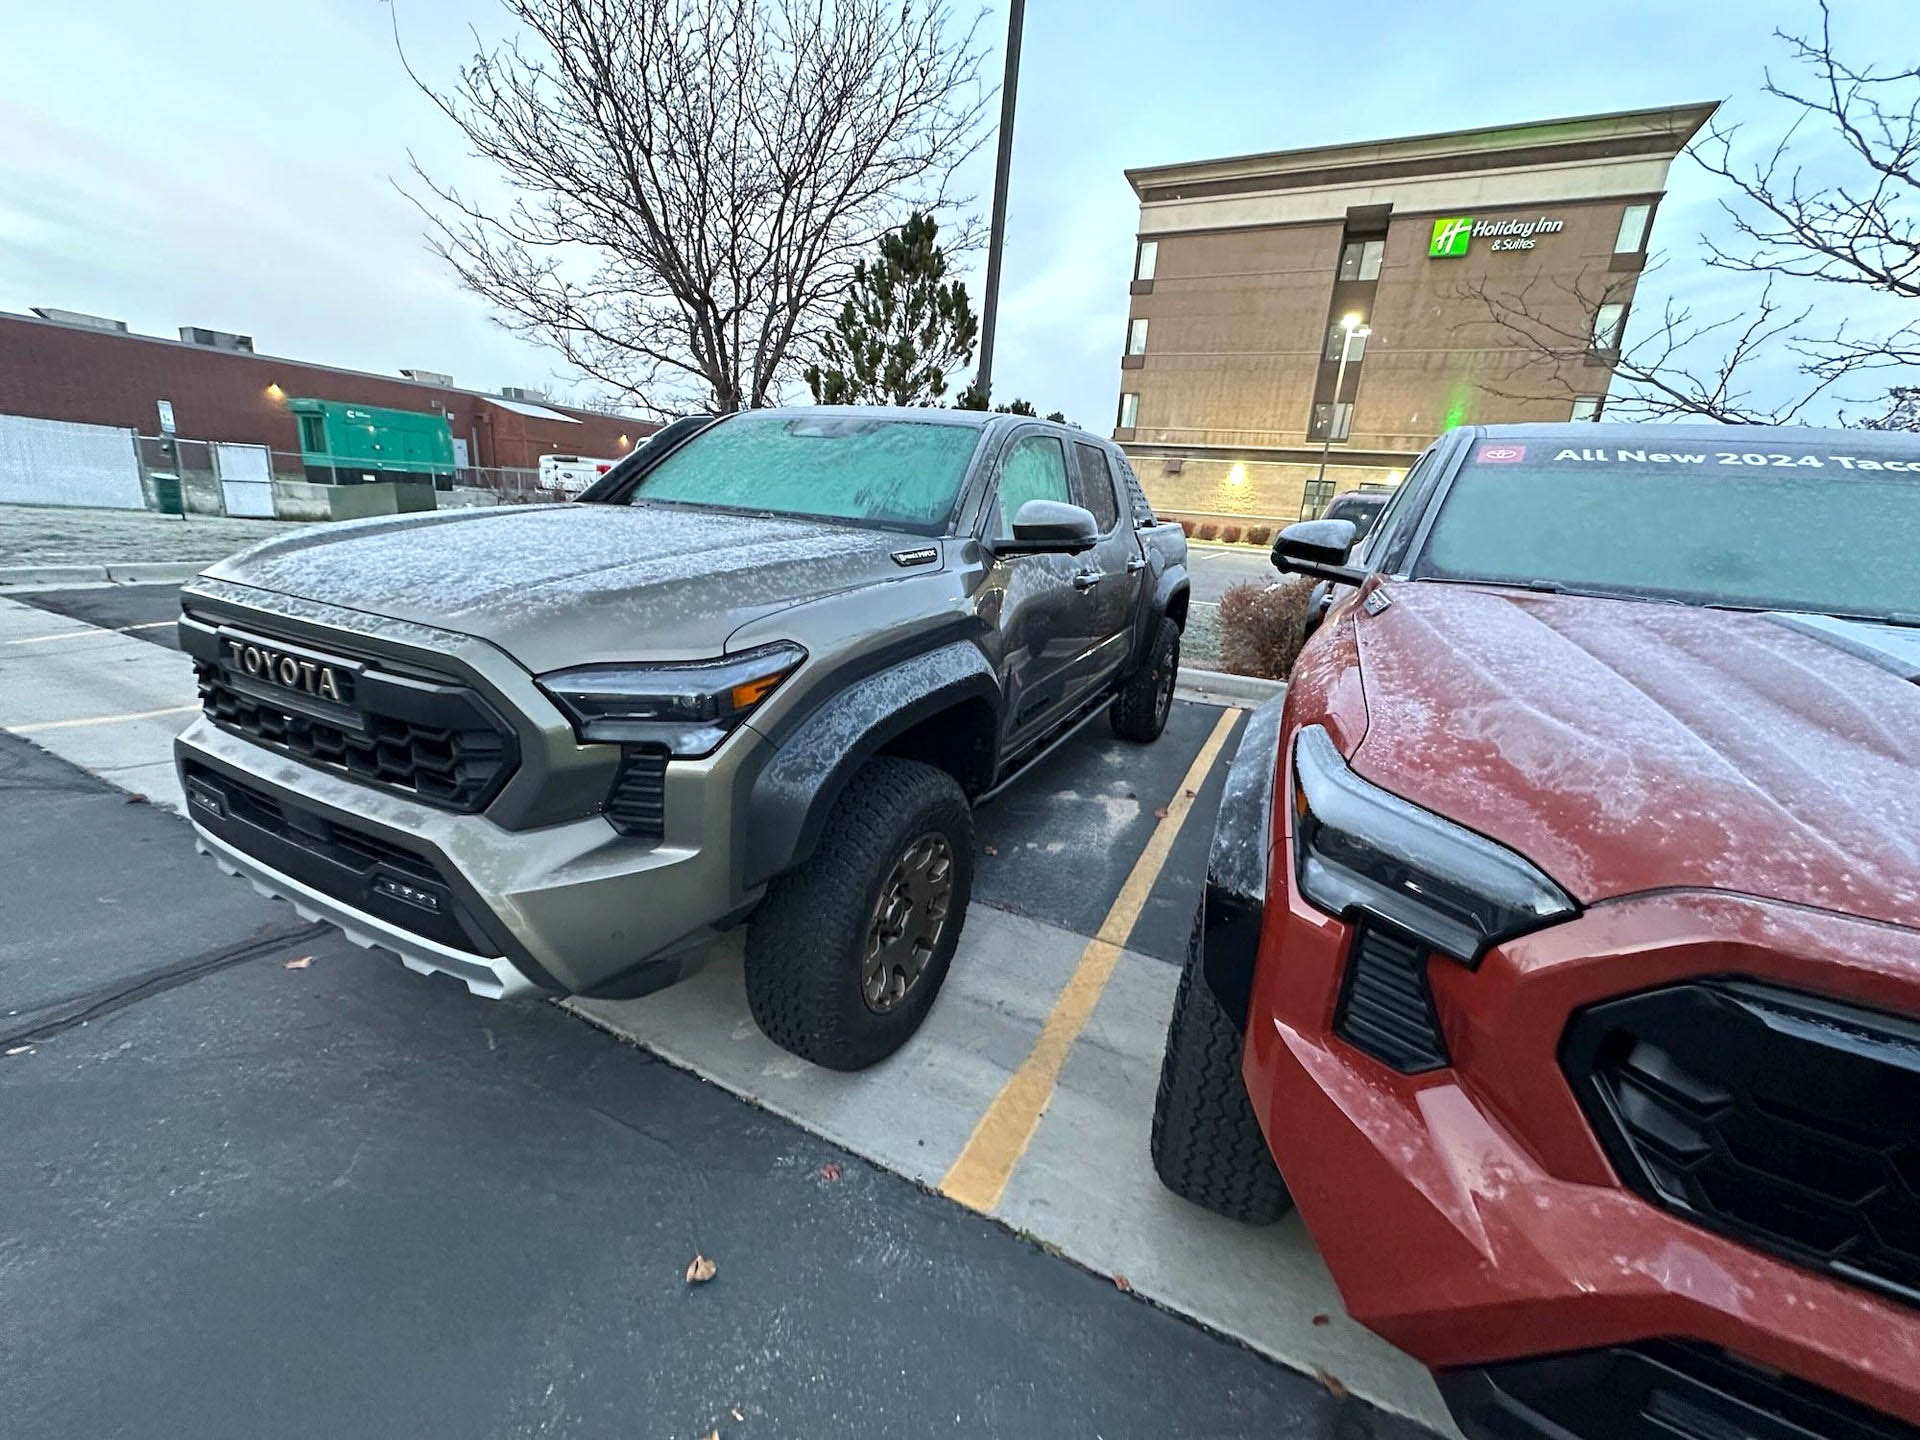 2024 Tacoma Official BRONZE OXIDE 2024 Tacoma Thread (4th Gen) 2024 Tacoma TRD Pro Terra and Trailhunter Bronze oxide side by side 9